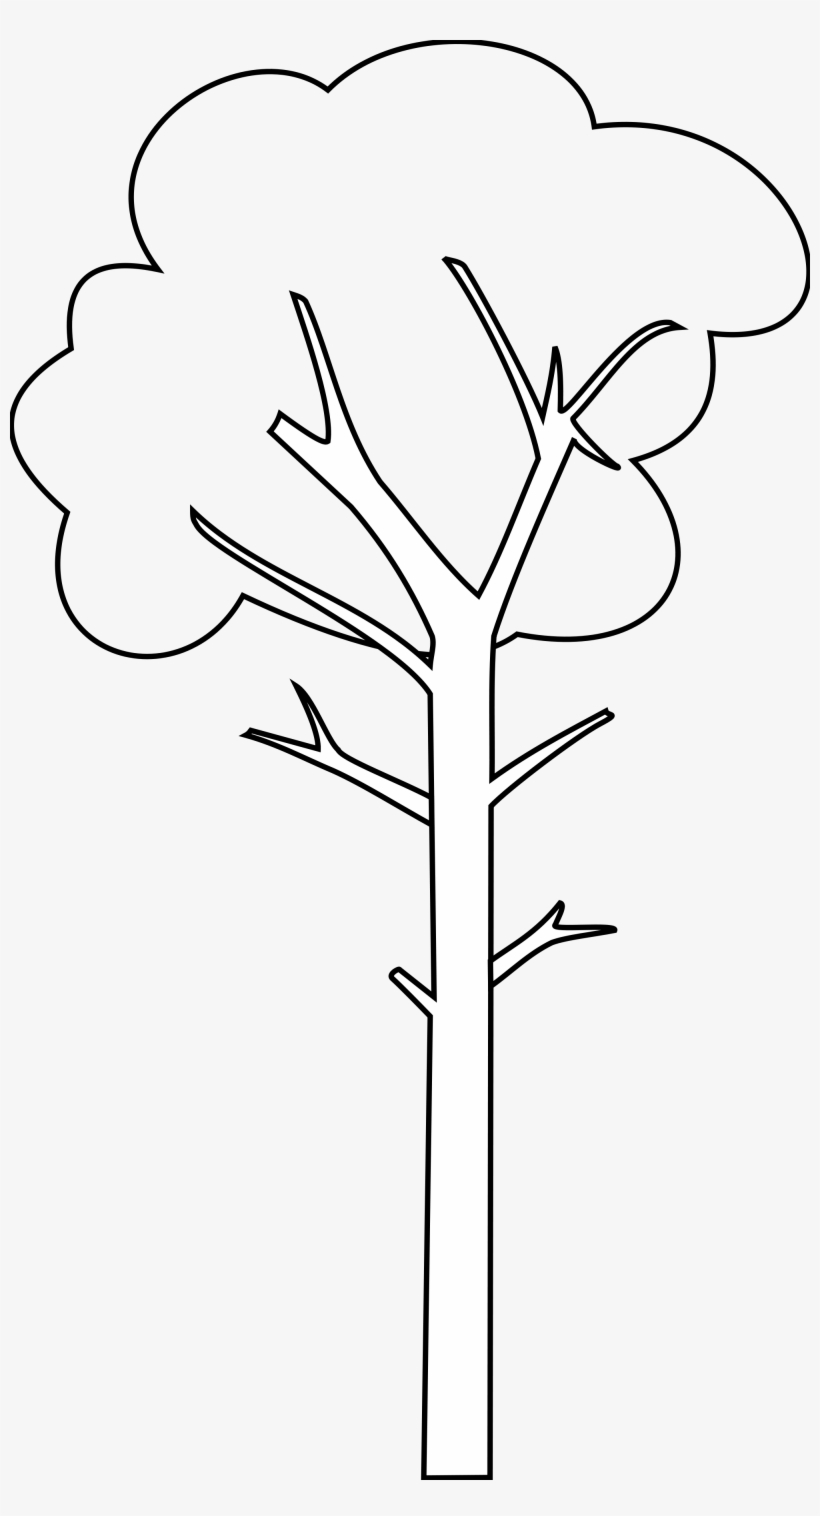 Tall Tree Cartoon Black And White Tall Tree Clipart Black And White Free Transparent Png Download Pngkey